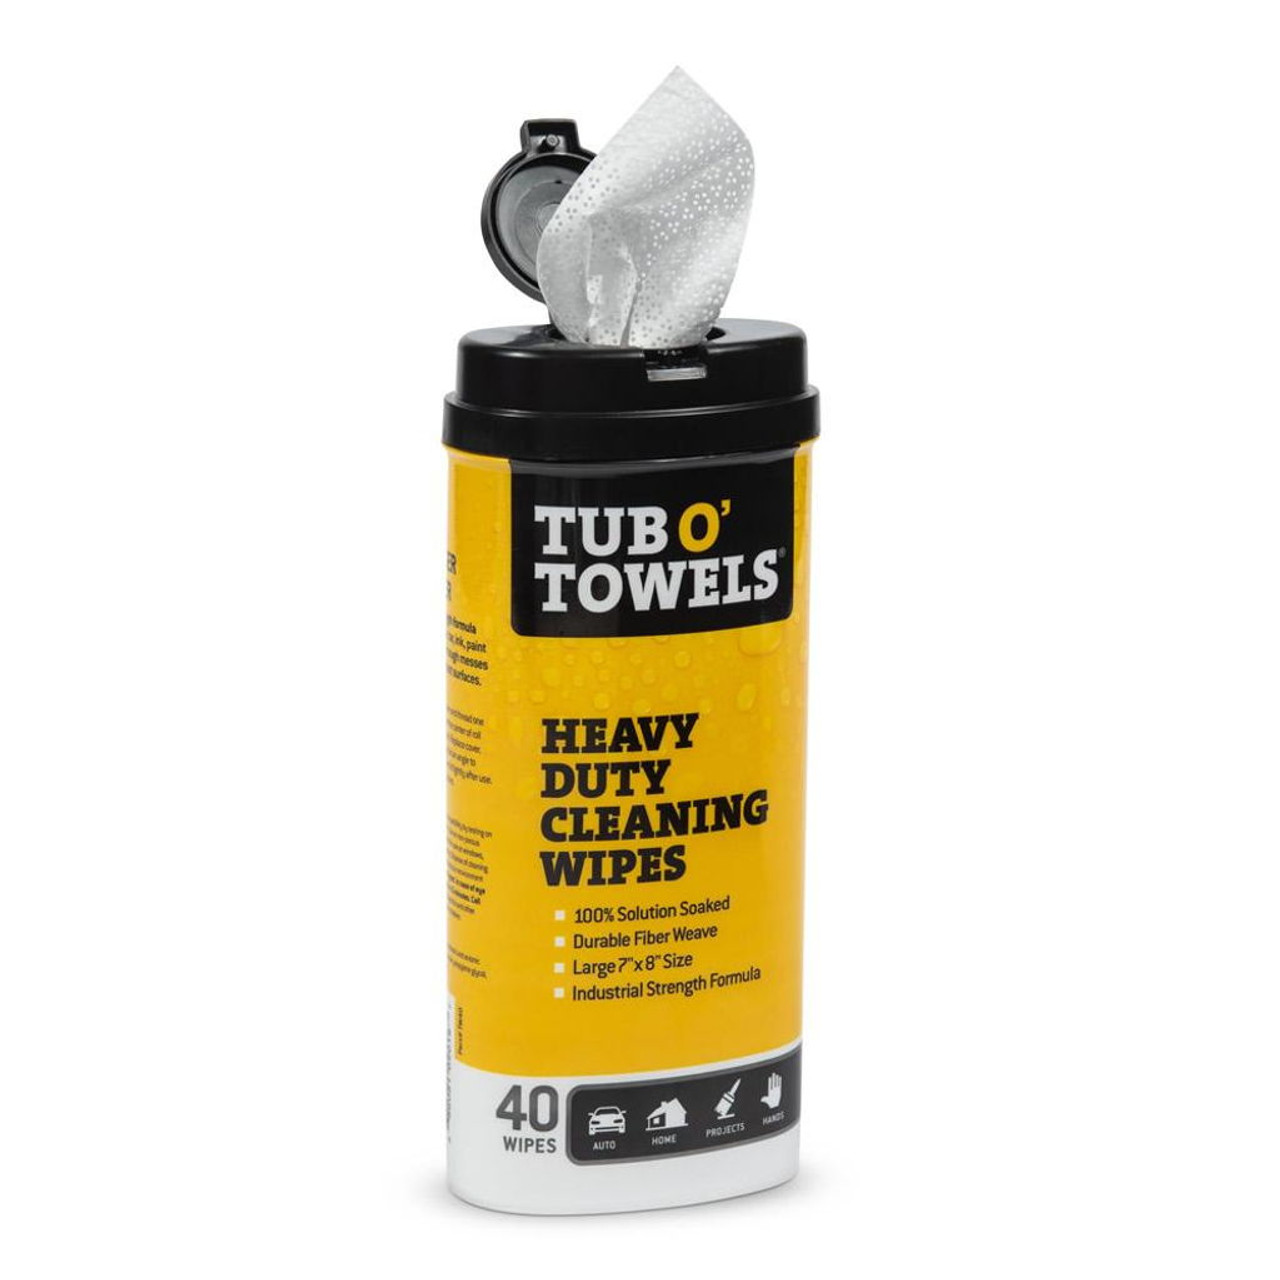 Tub O Towels Heavy-Duty 7 x 8 Size Multi-Surface Cleaning Wipes, 40 Count per Canister - 3 Pack